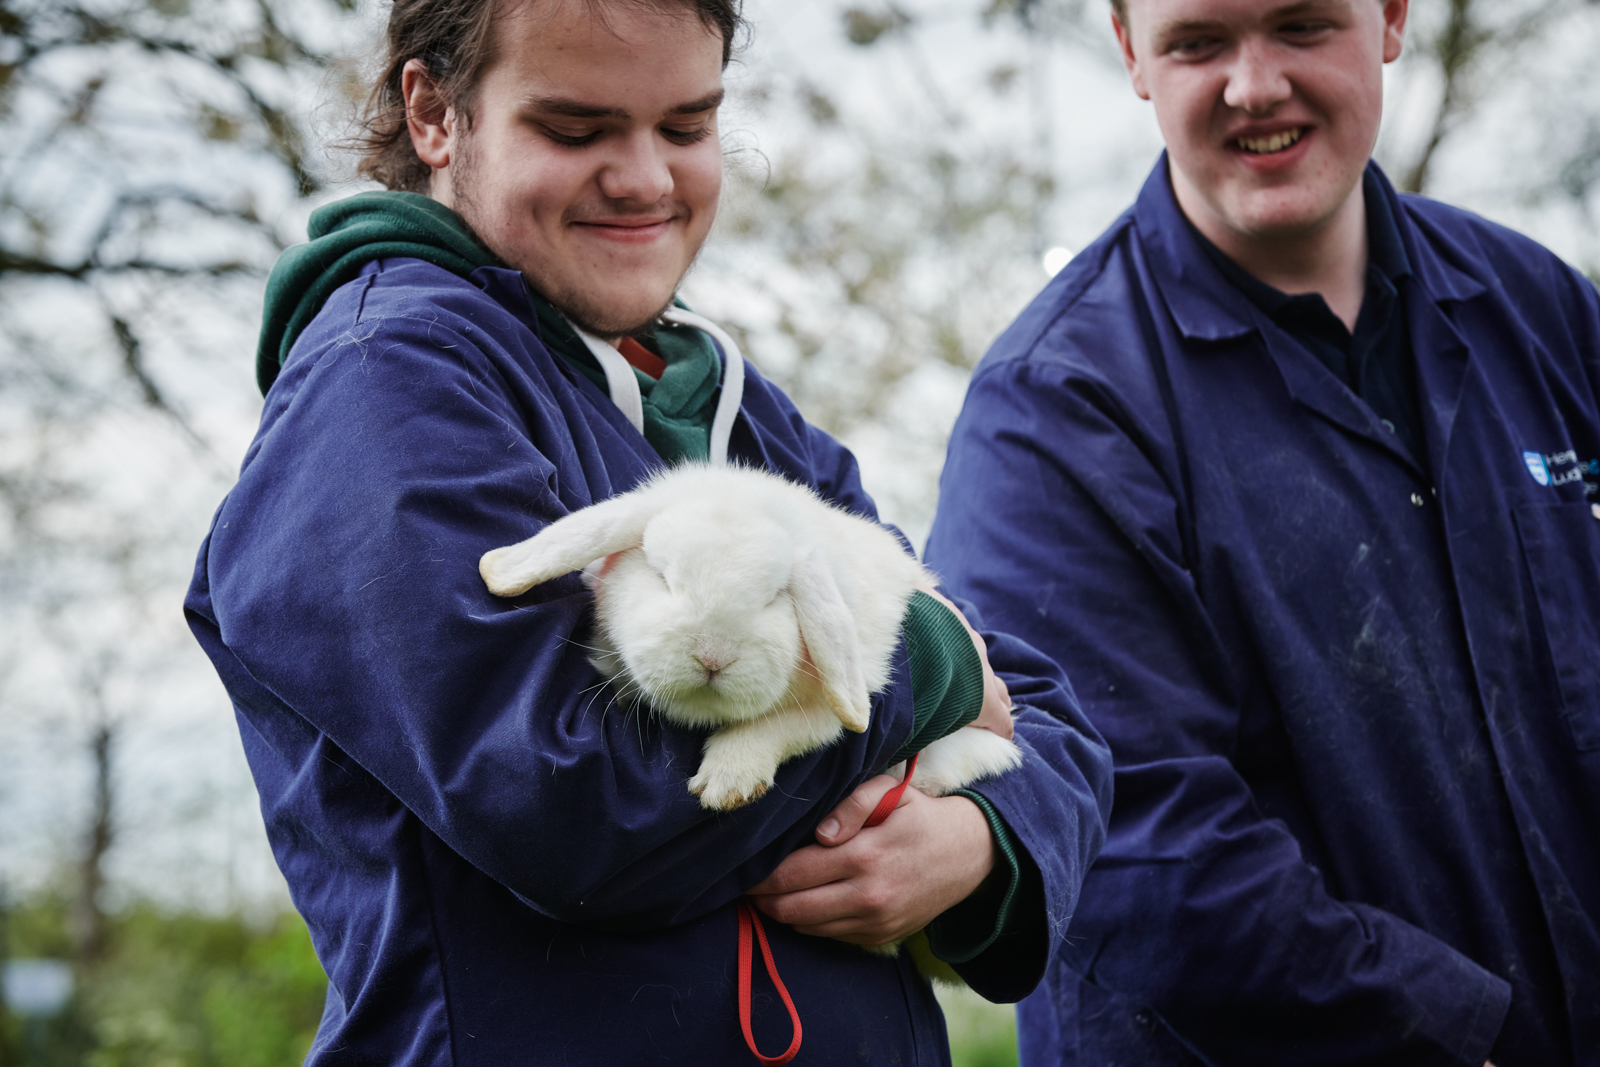 student holding a white bunny that has fell asleep